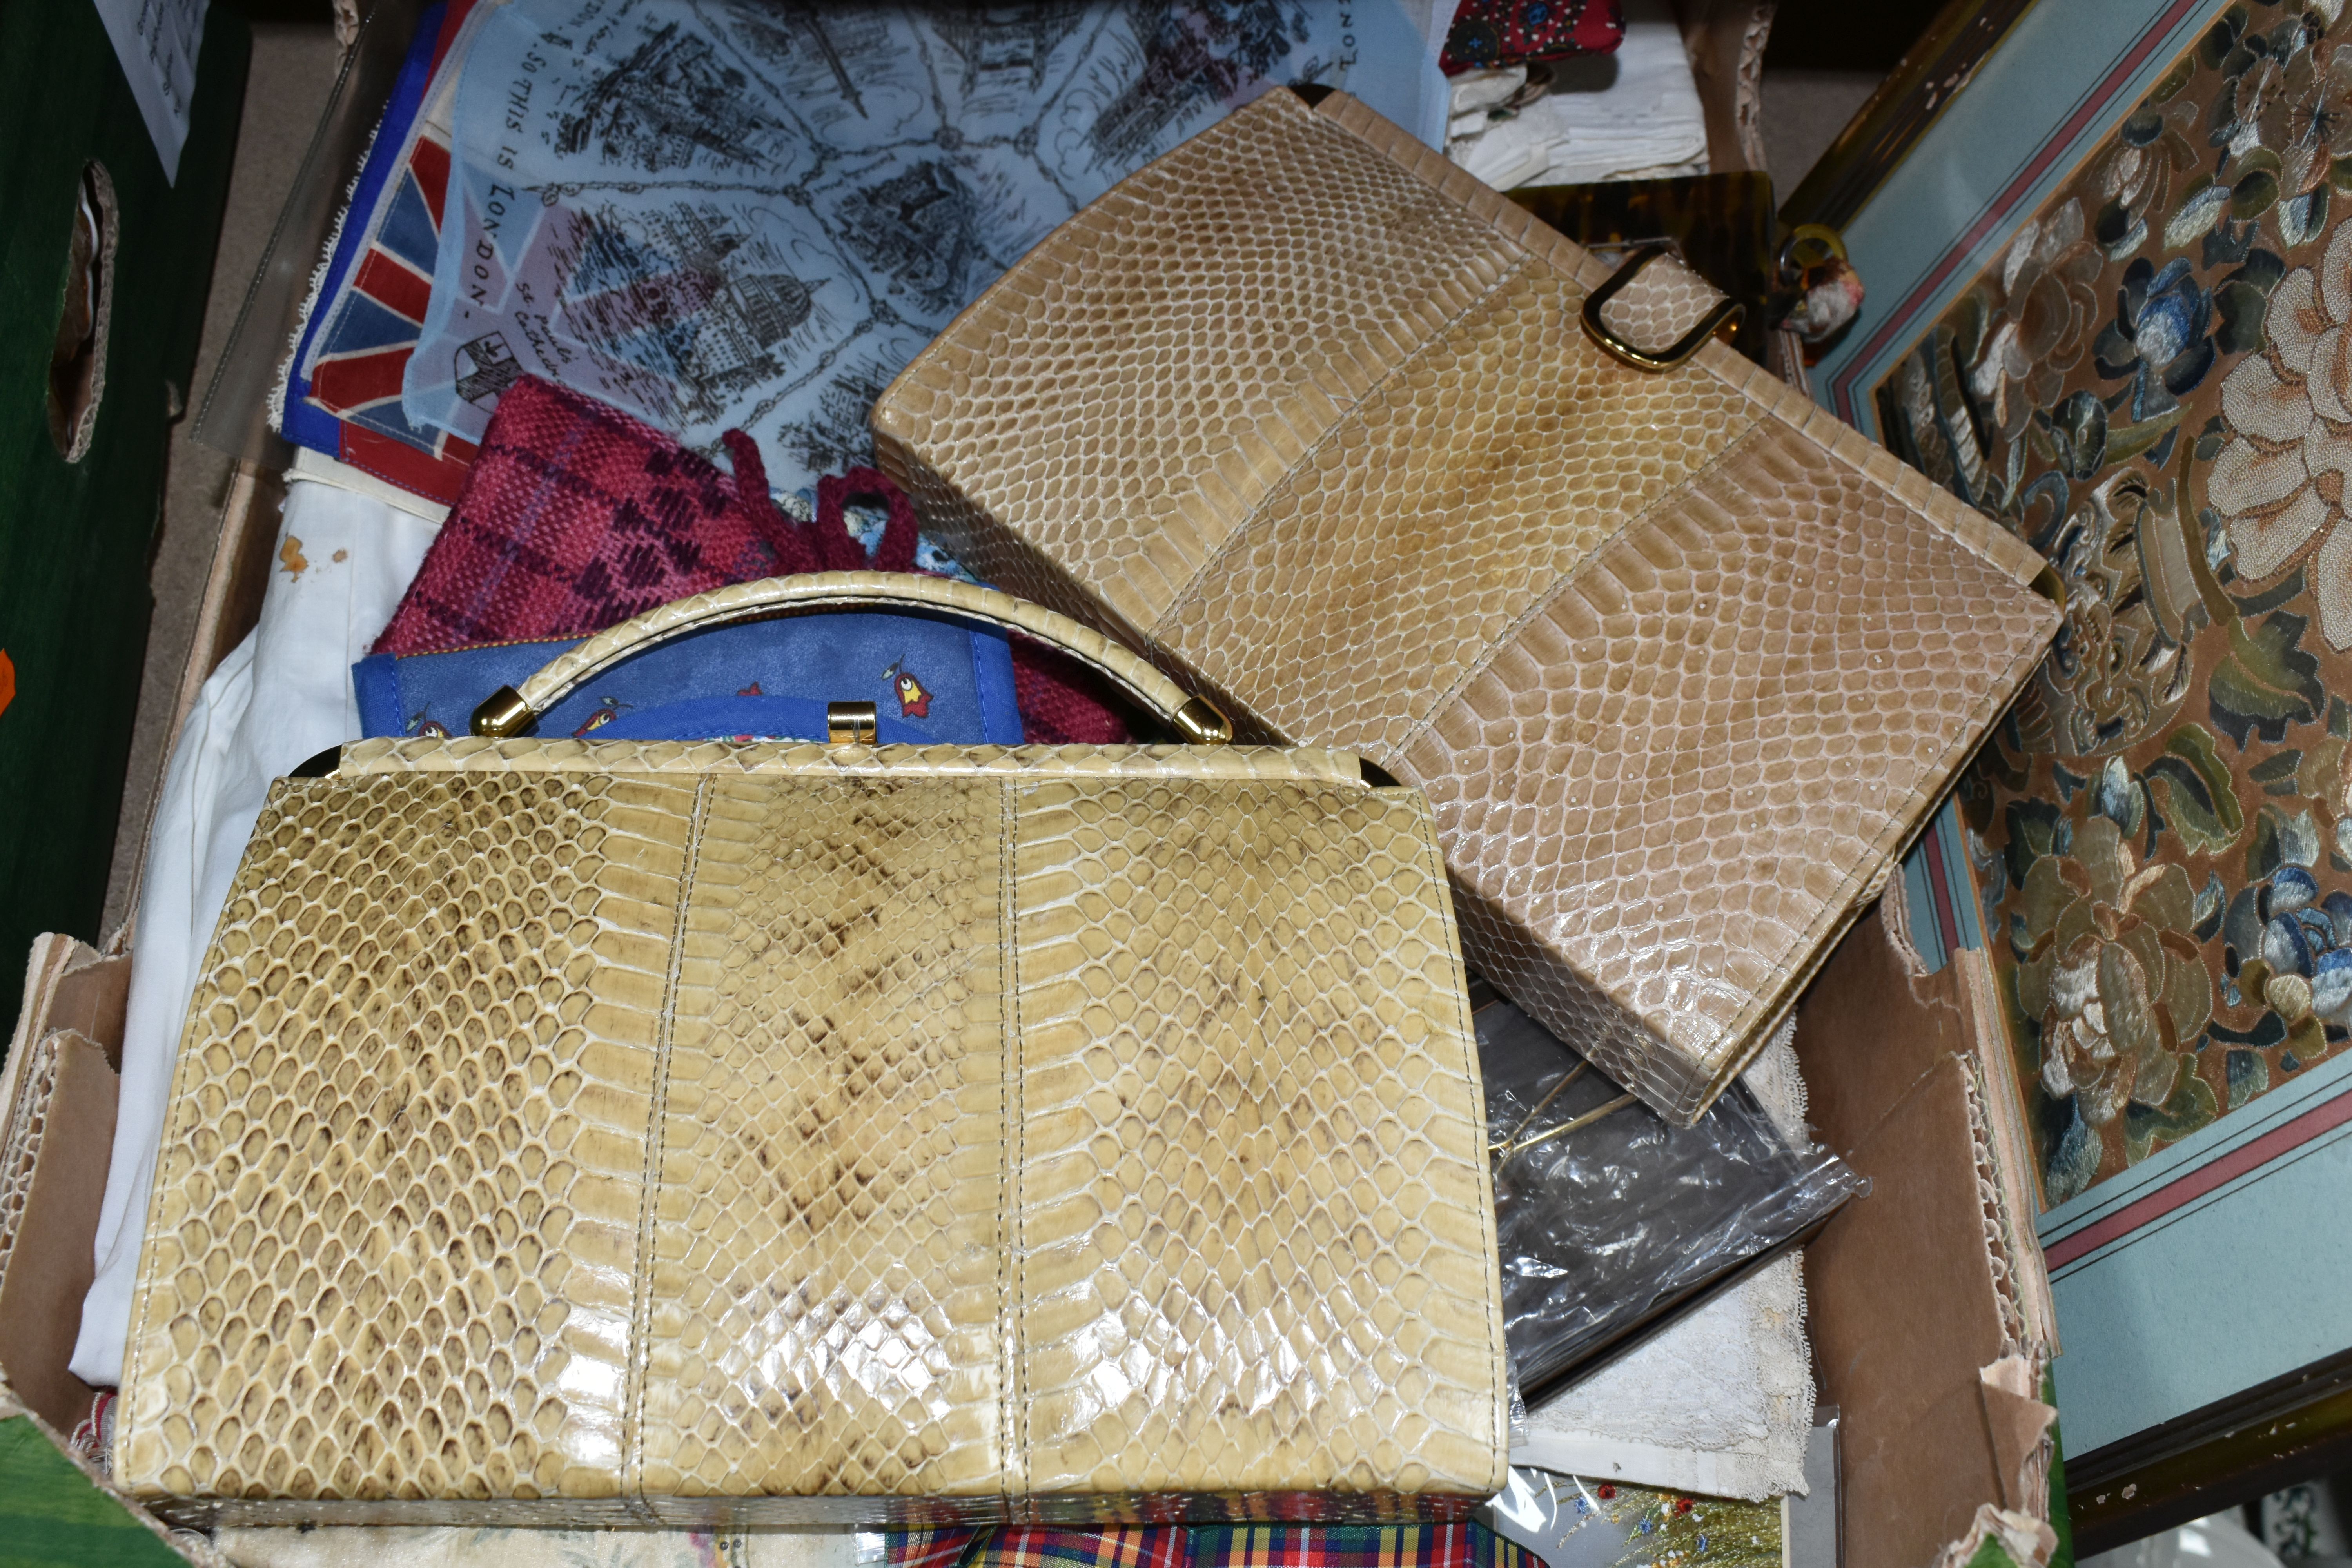 ONE BOX OF VINTAGE HANDKERCHIEFS, EMBROIDERY KITS, AND SNAKE SKIN HANDBAGS, with a large - Image 3 of 6